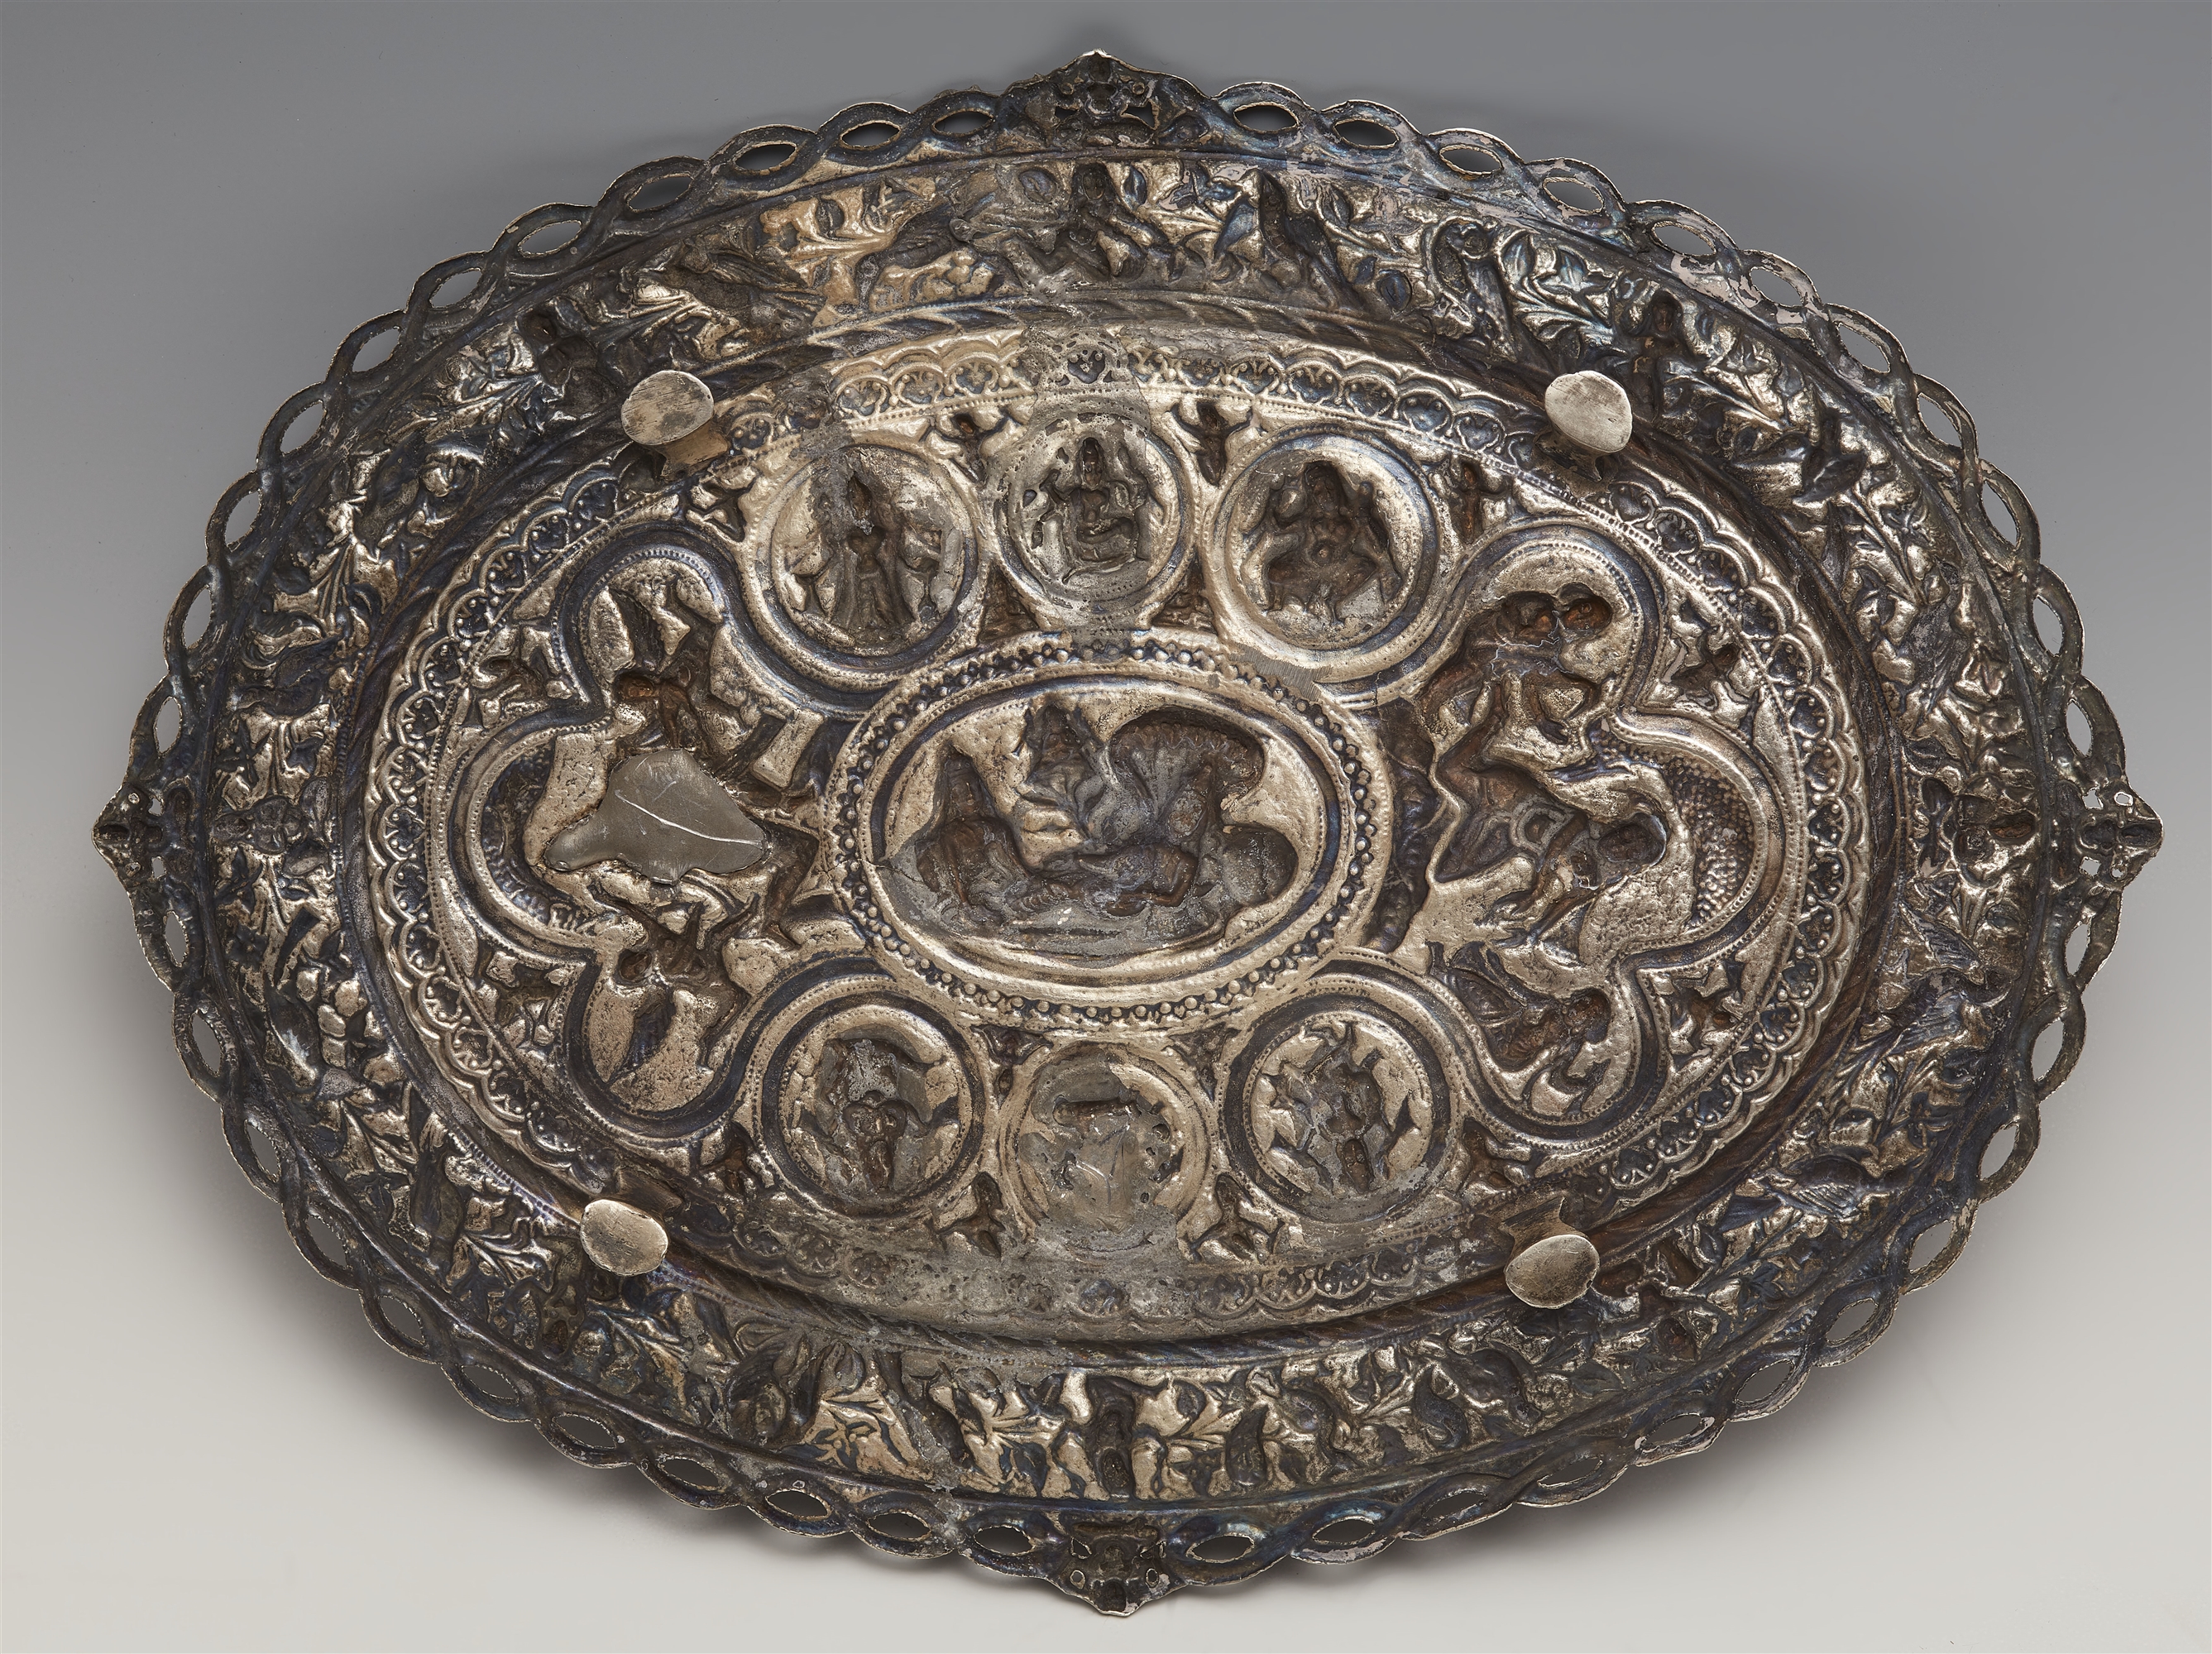 A Poona oval silver swami pattern footed tray. Late 19th century - Image 2 of 2